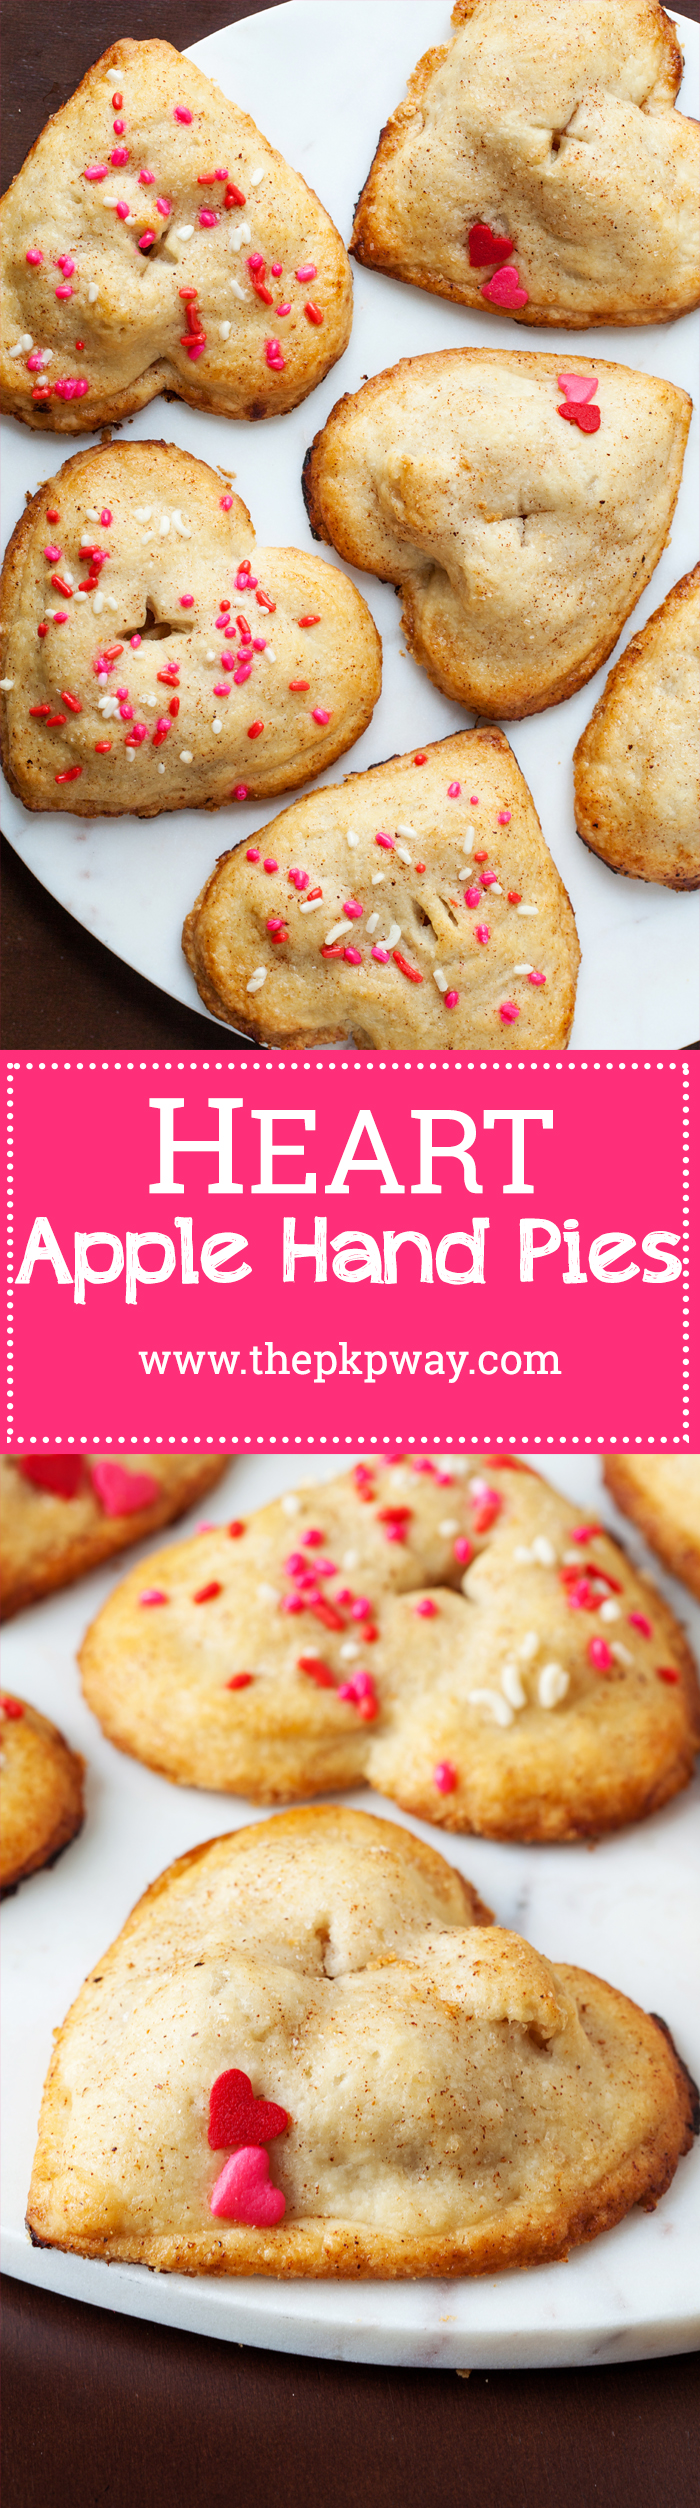 These heart apple hand pies are completely irresistible with their utterly flaky crust and scrumptious cinnamon and apple filling.